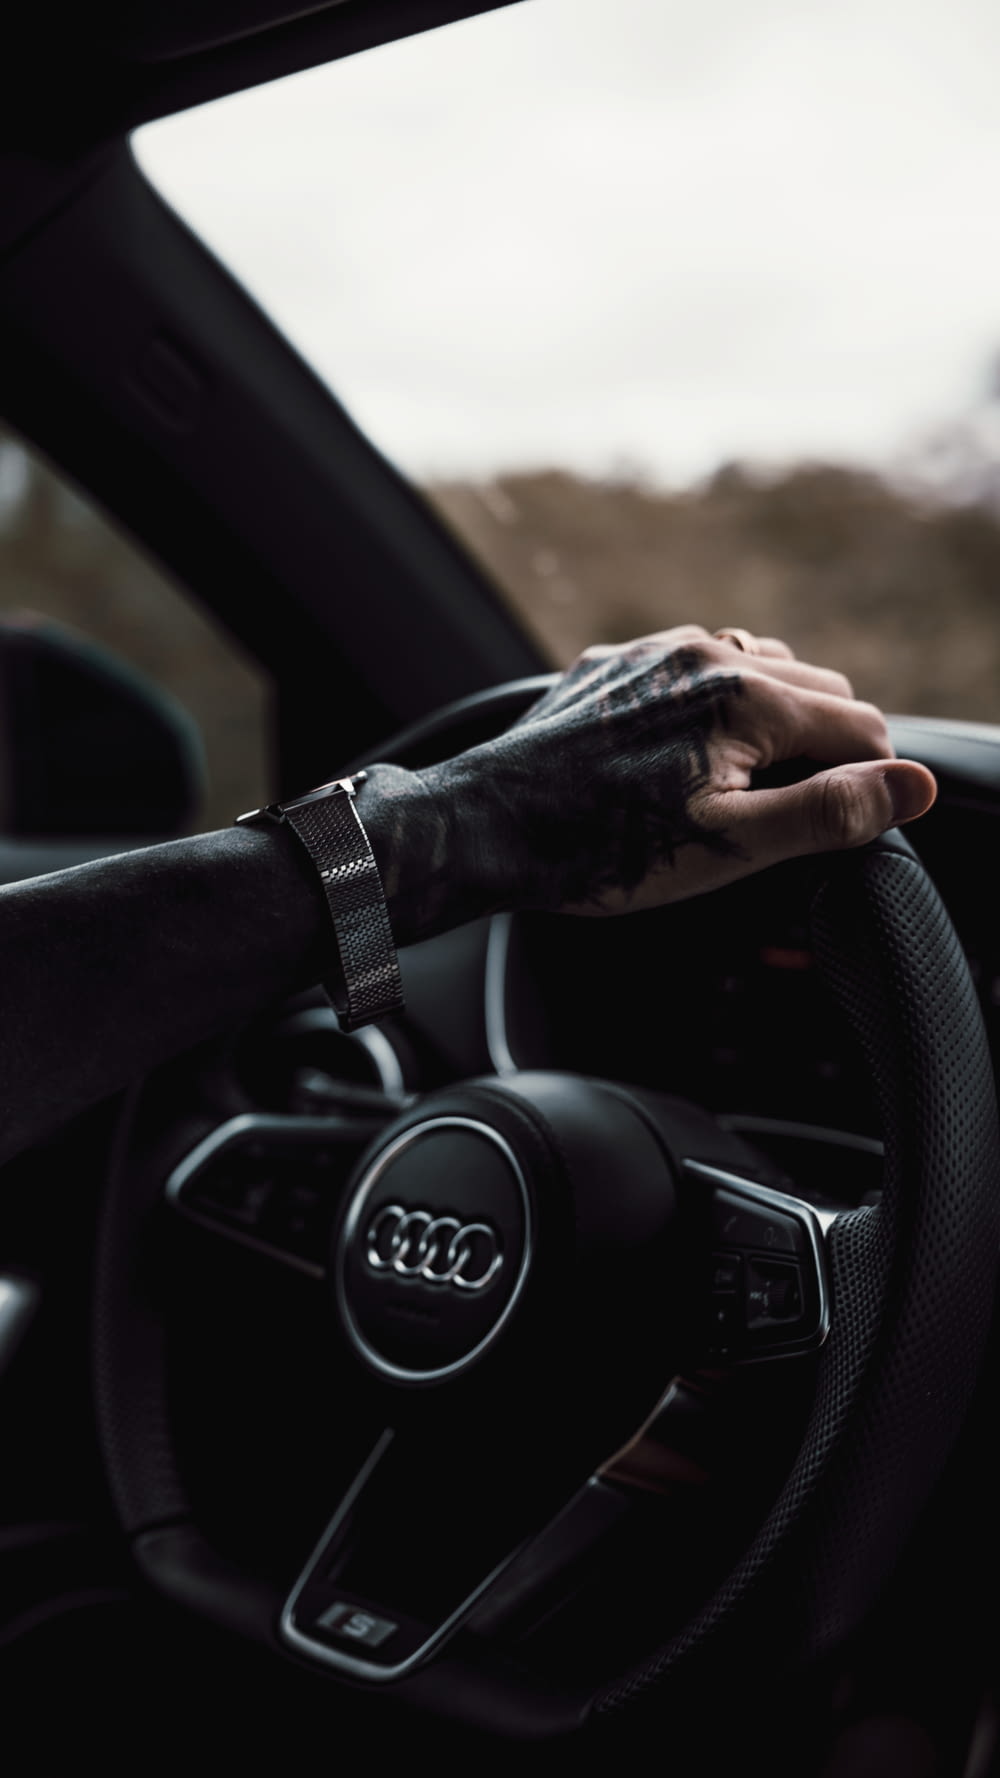 a person's hand on the steering wheel of a car